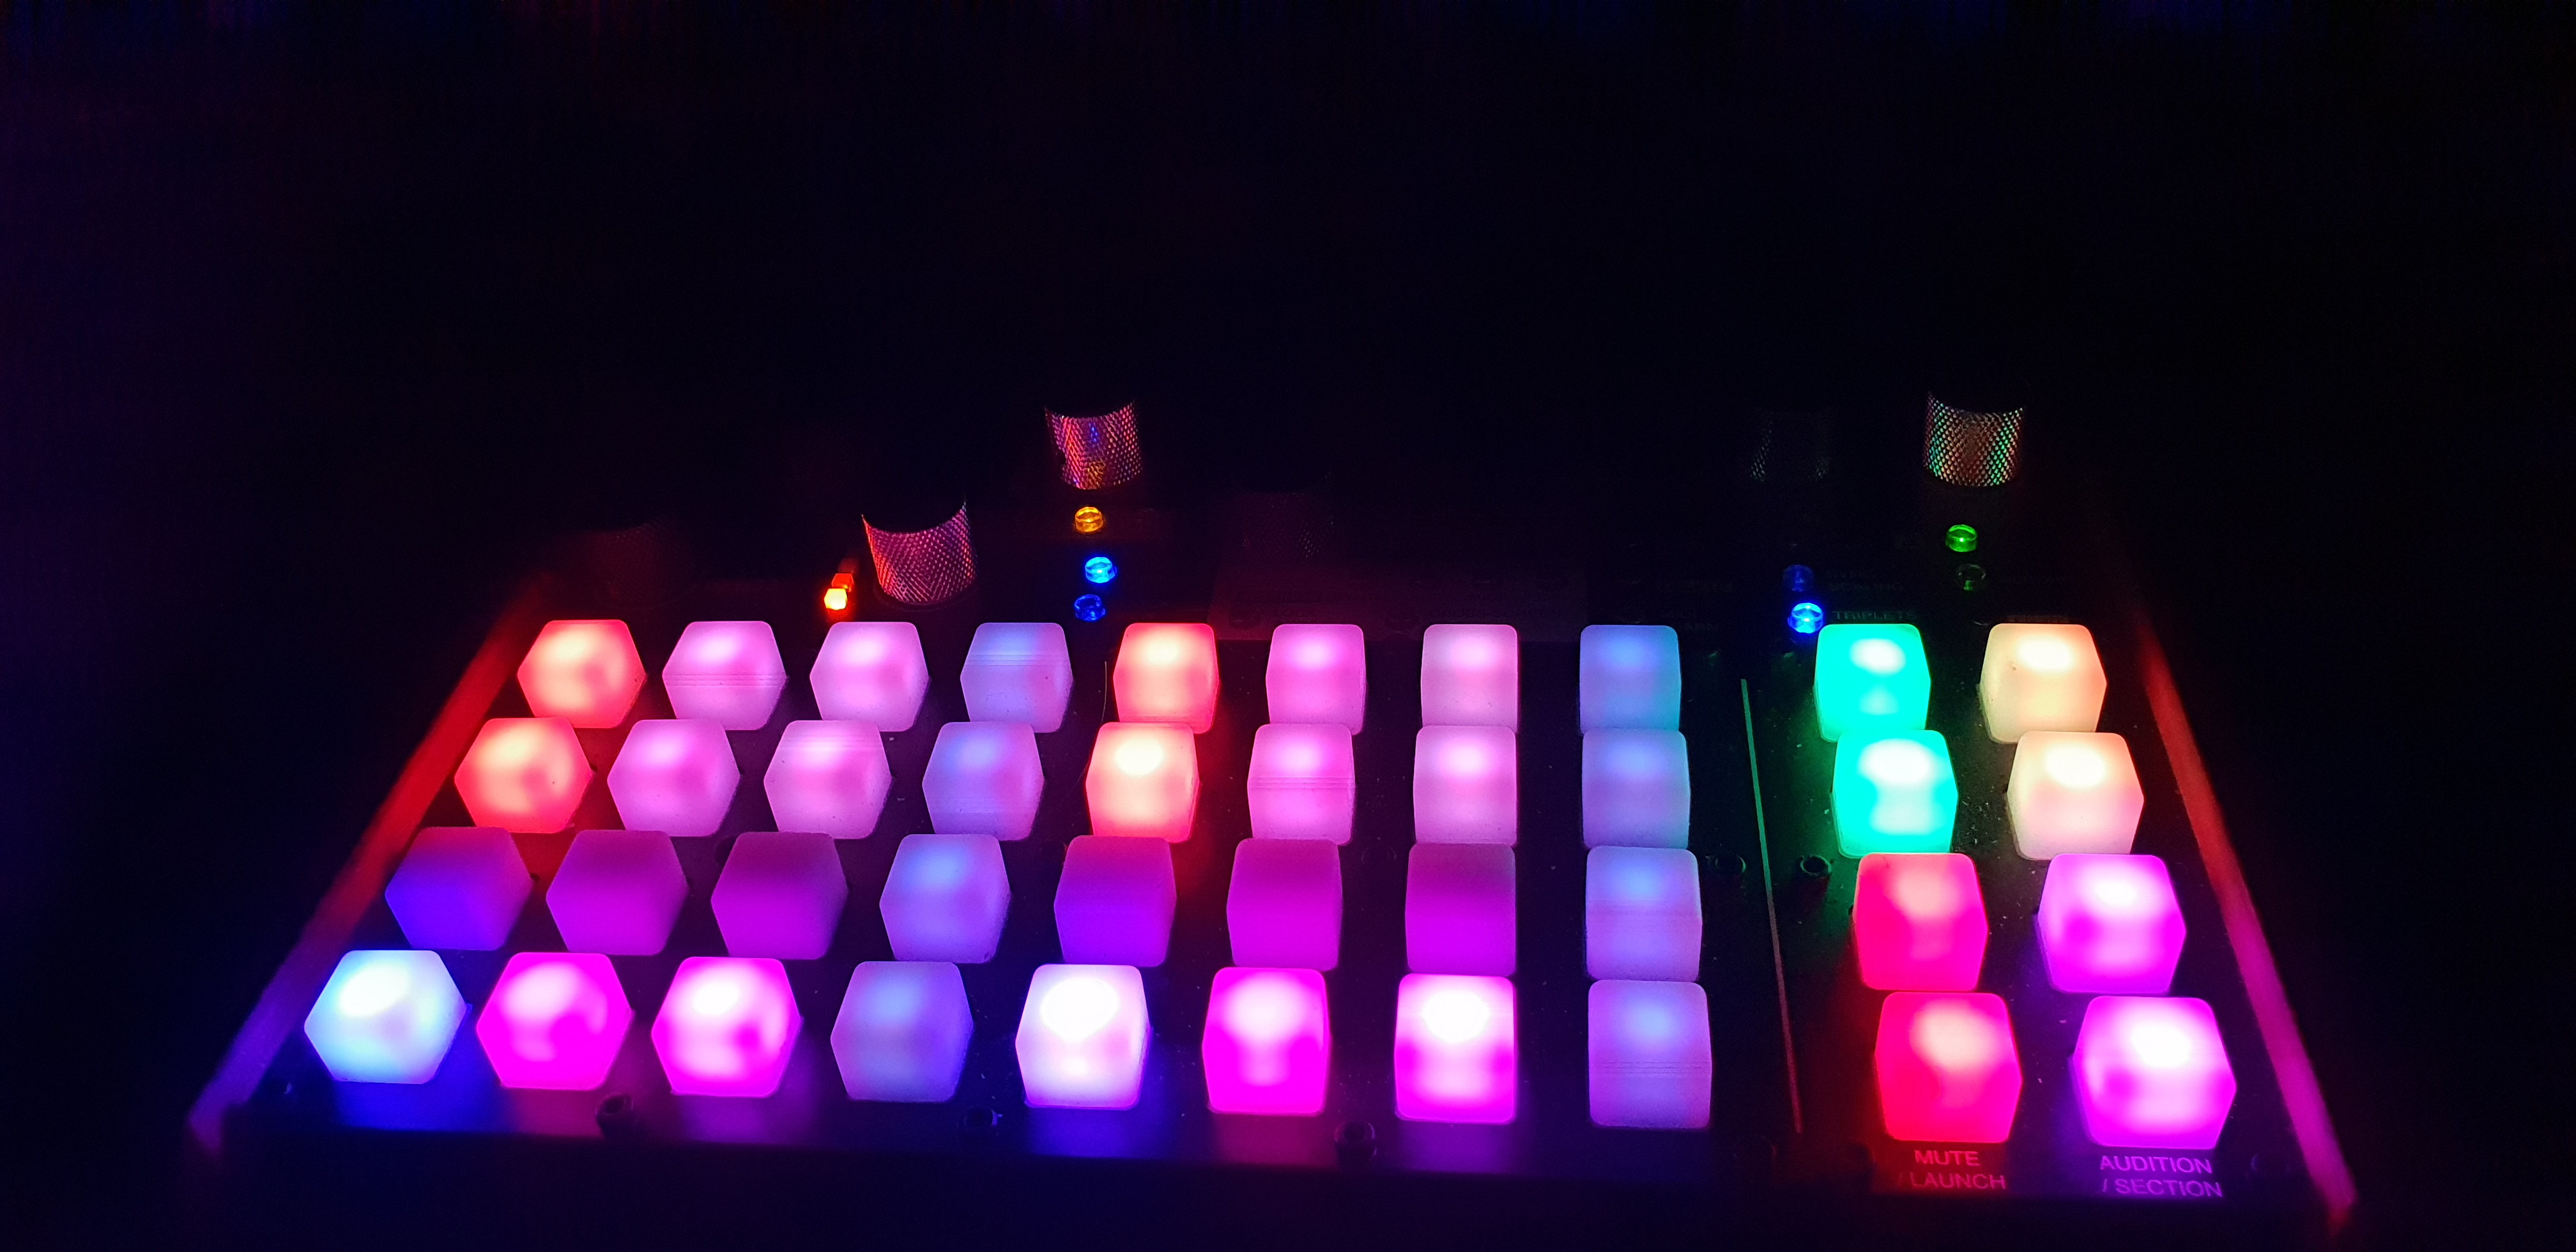 A photo of the deluge with its "sugarcube" buttons led lights bright